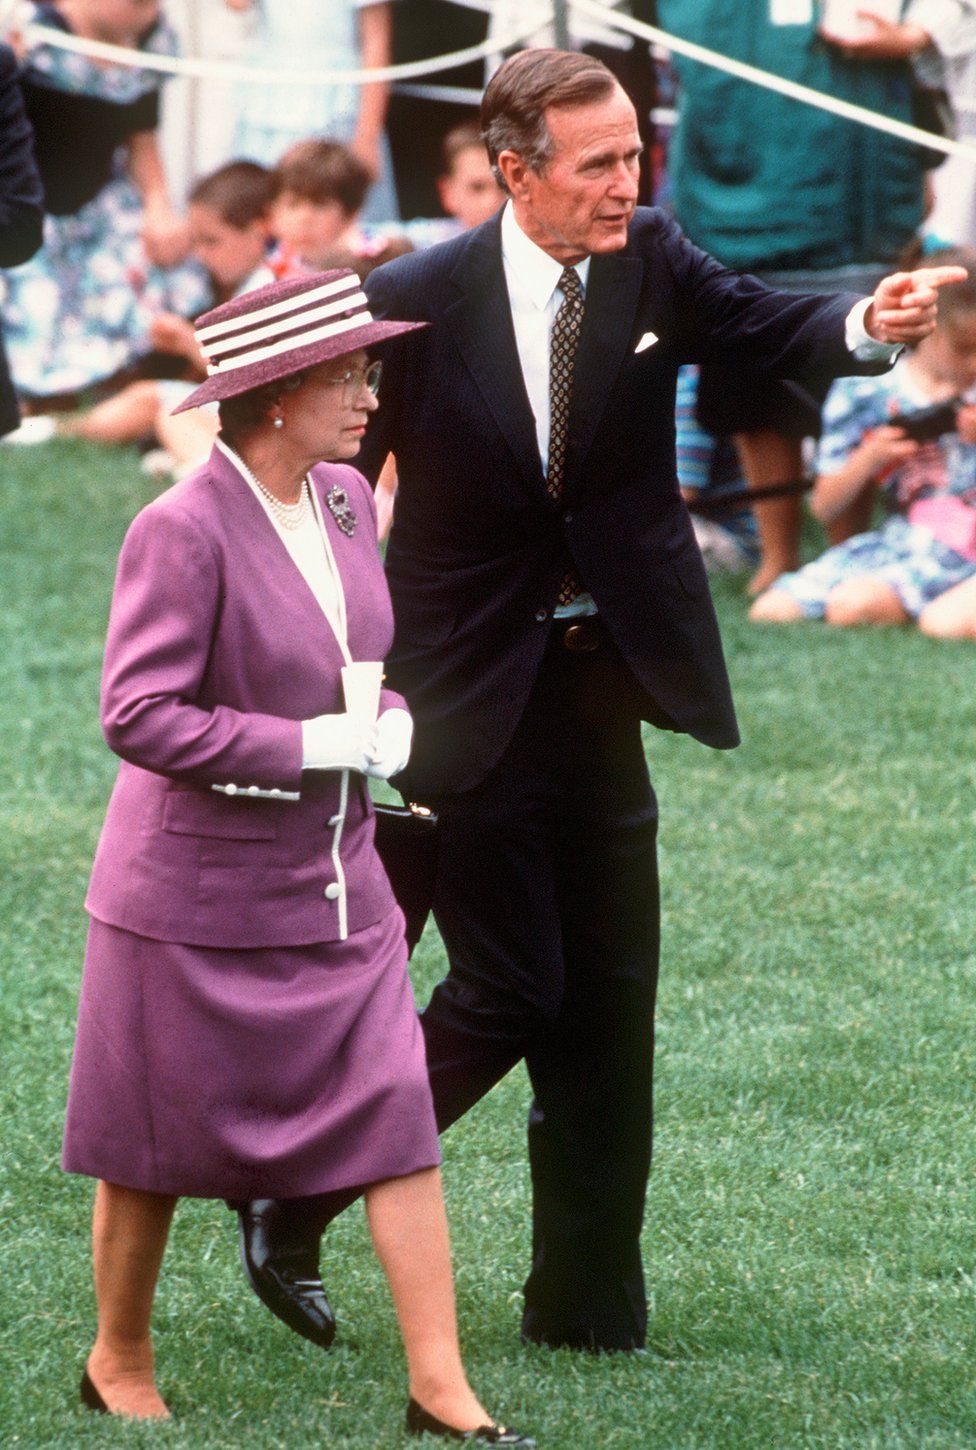 Queen Elizabeth ll with US President George Bush in Washington DC, USA in May 1991